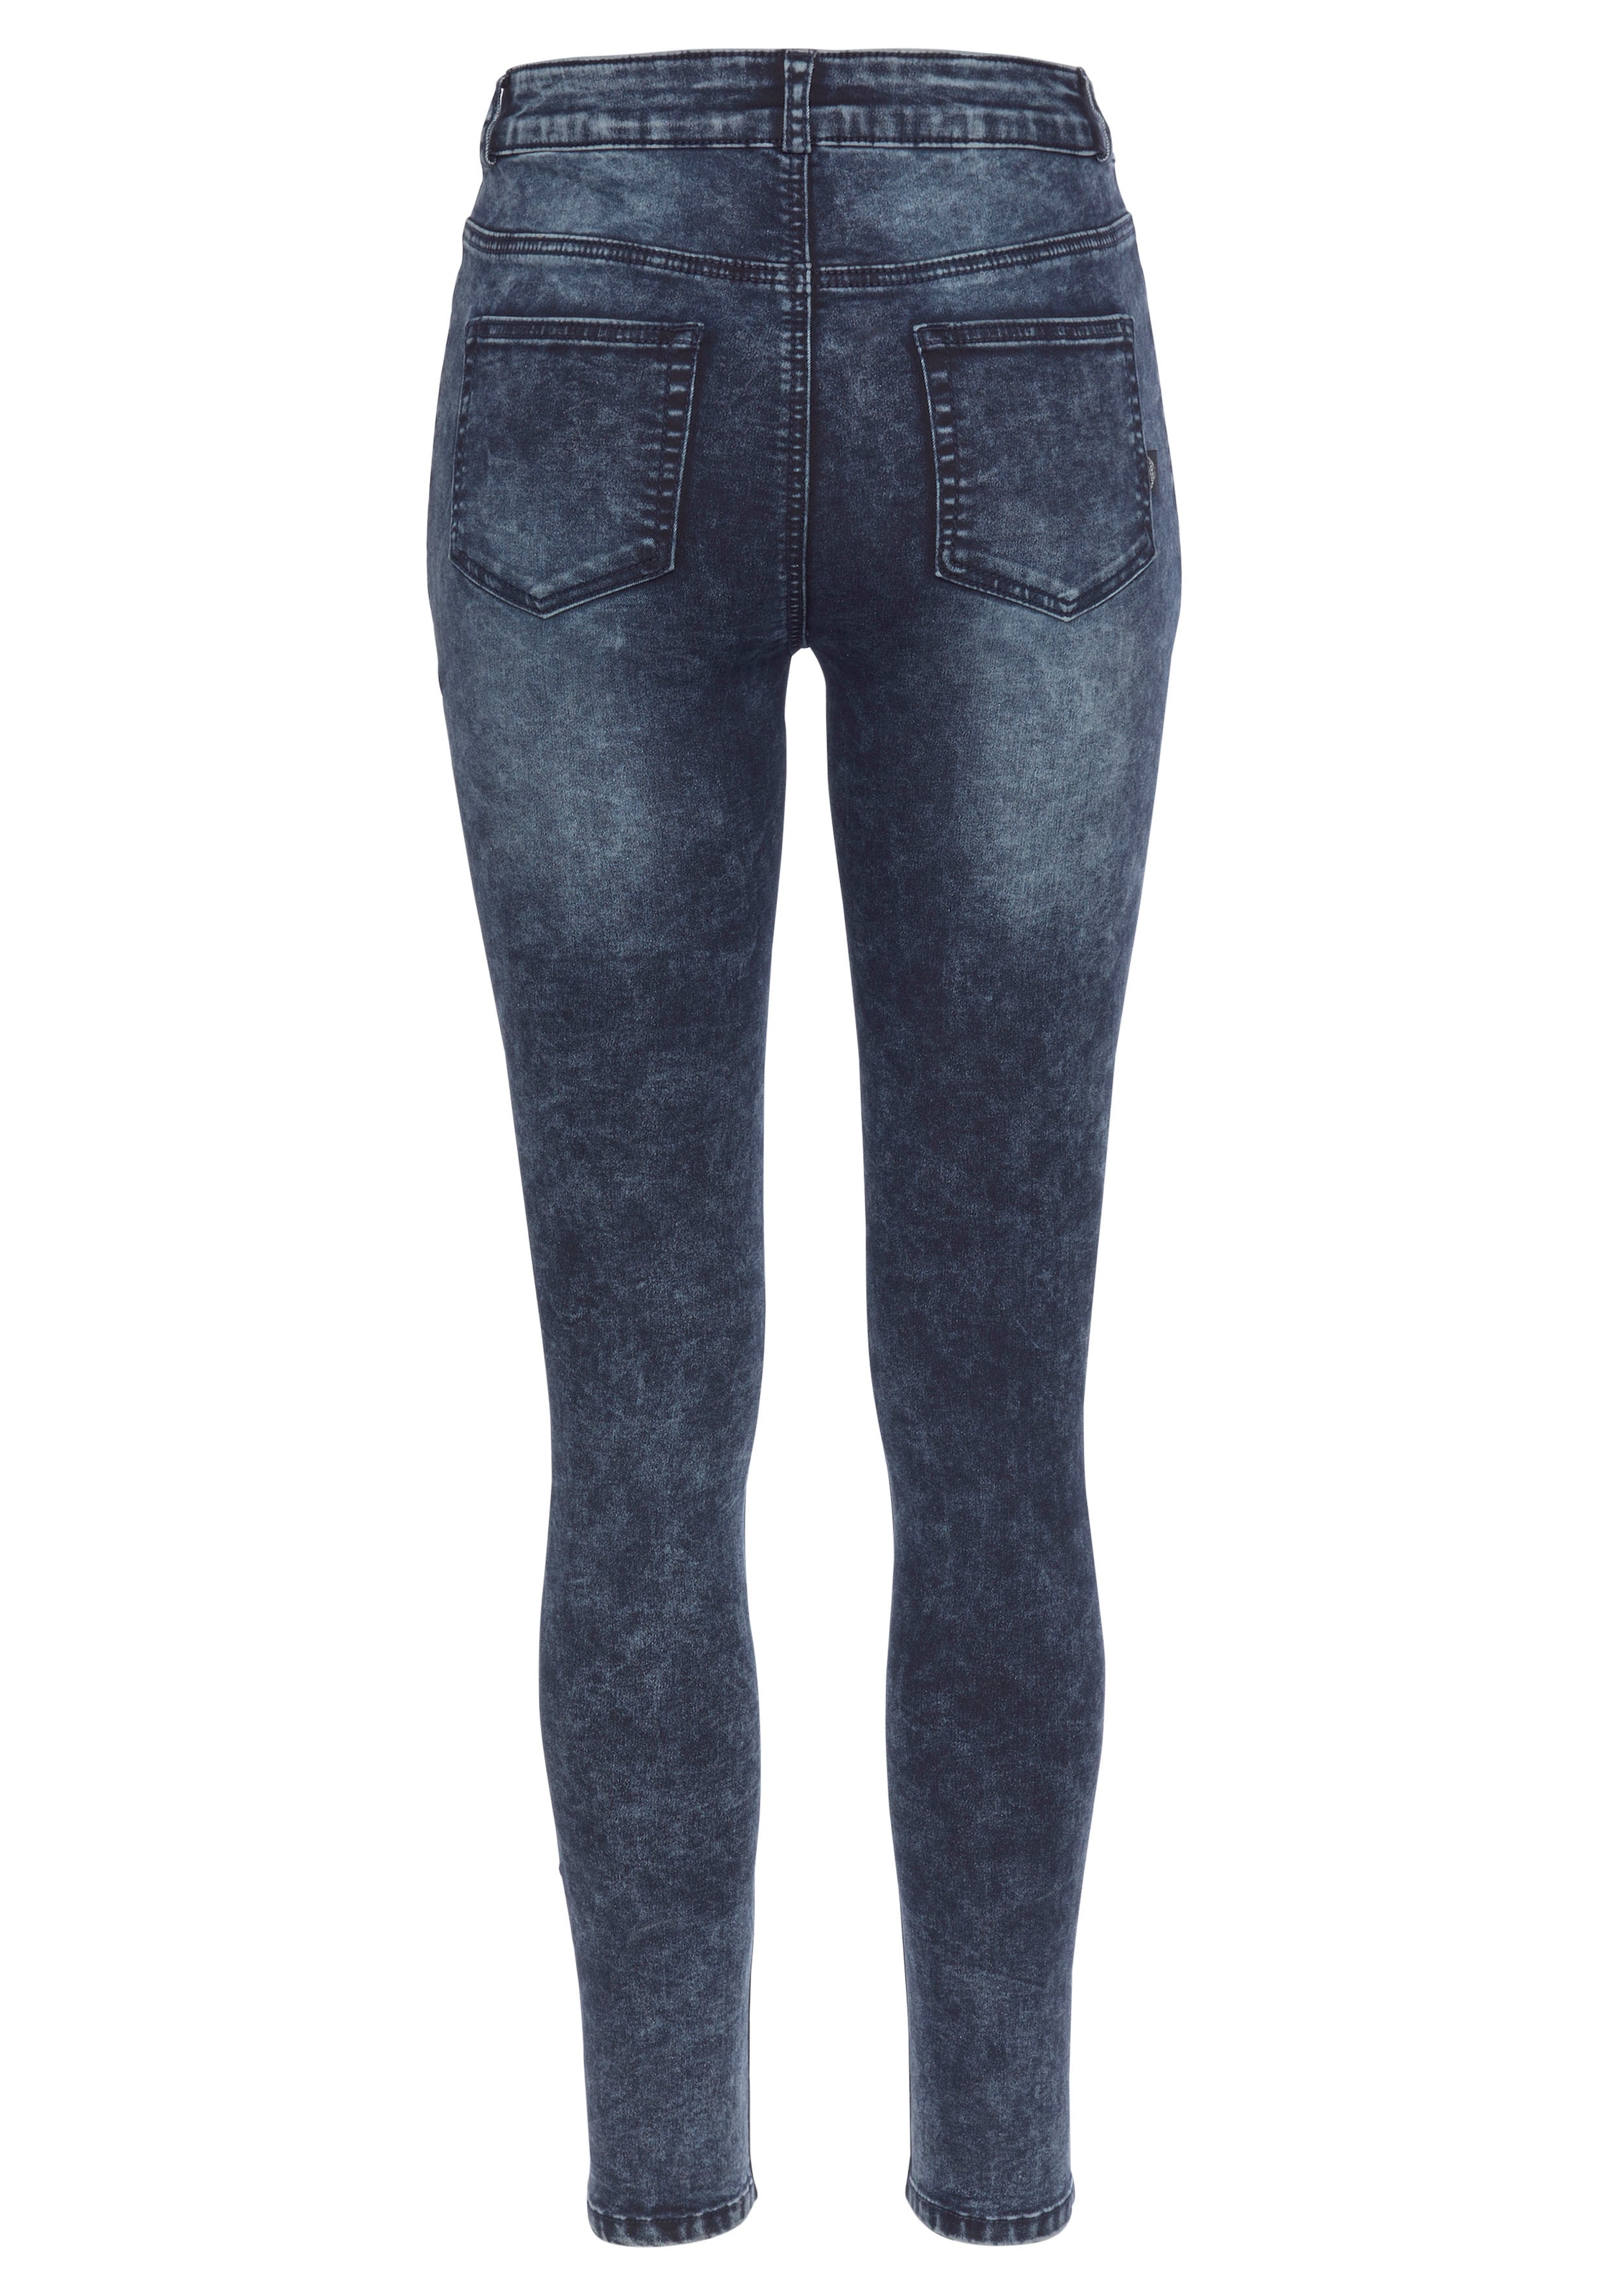 Arizona Skinny-fit-Jeans Stretch Jeans | walking »Ultra moon washed«, Moonwashed shoppen I\'m